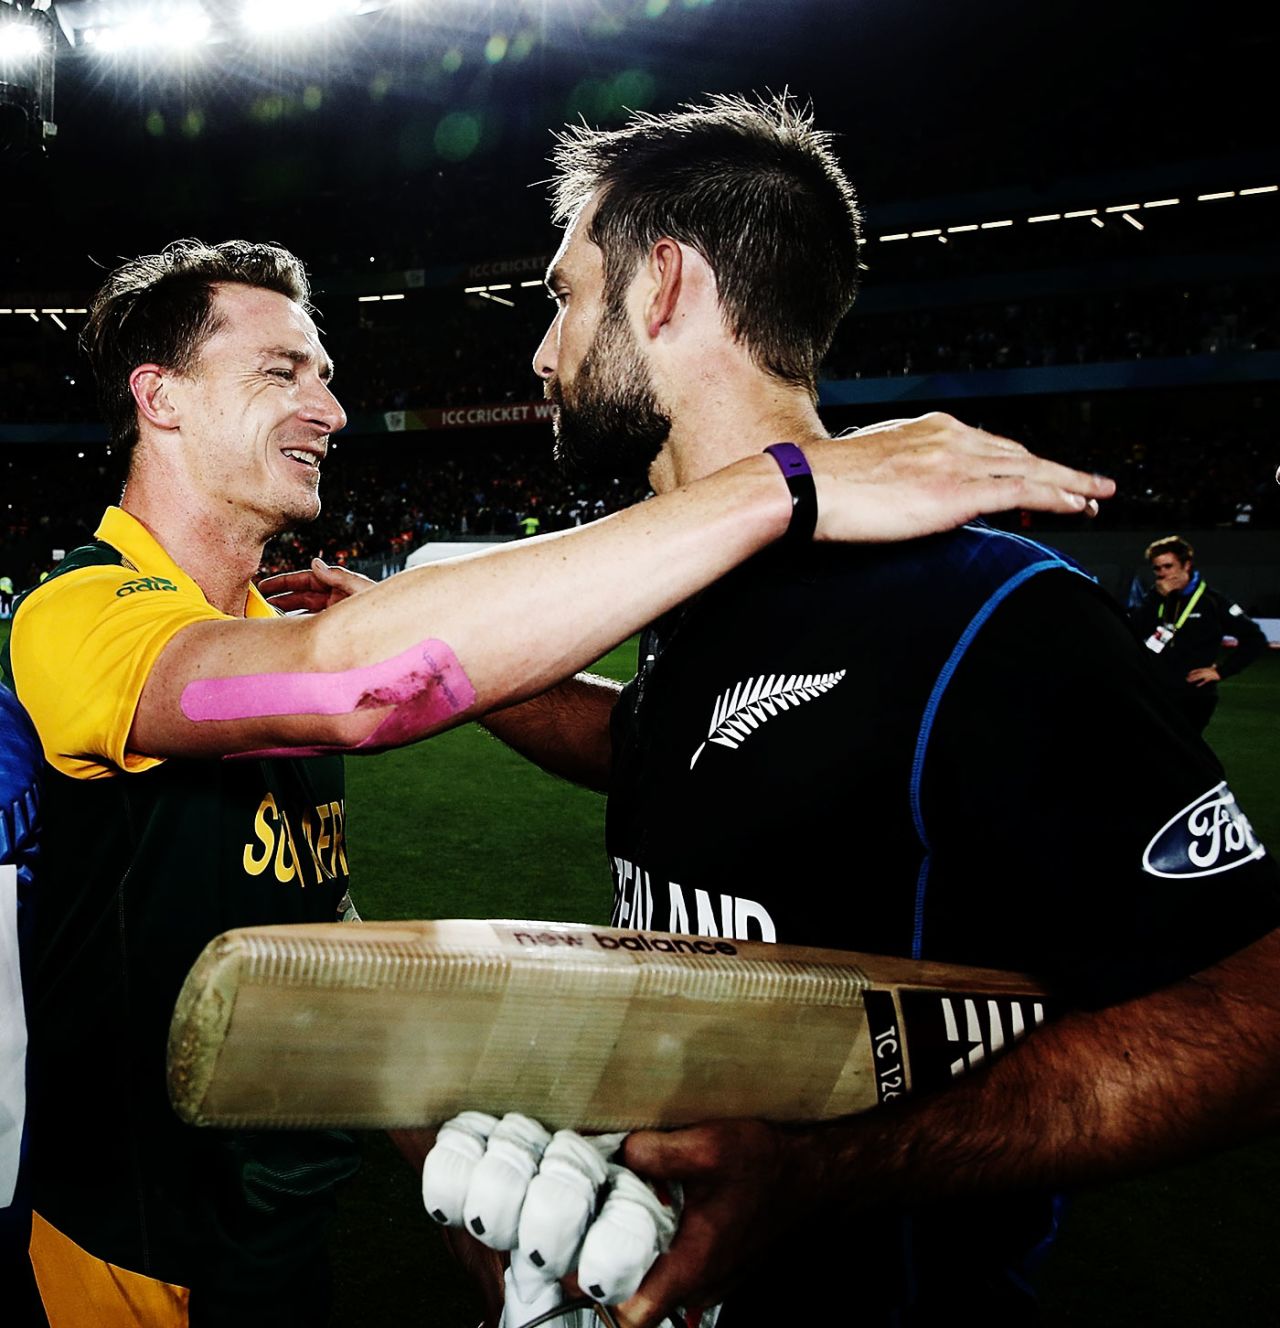 Grant Elliott commiserates with Dale Steyn up after a highly emotional finish, New Zealand v South Africa, World Cup 2015, 1st Semi-Final, Auckland, March 24, 2015